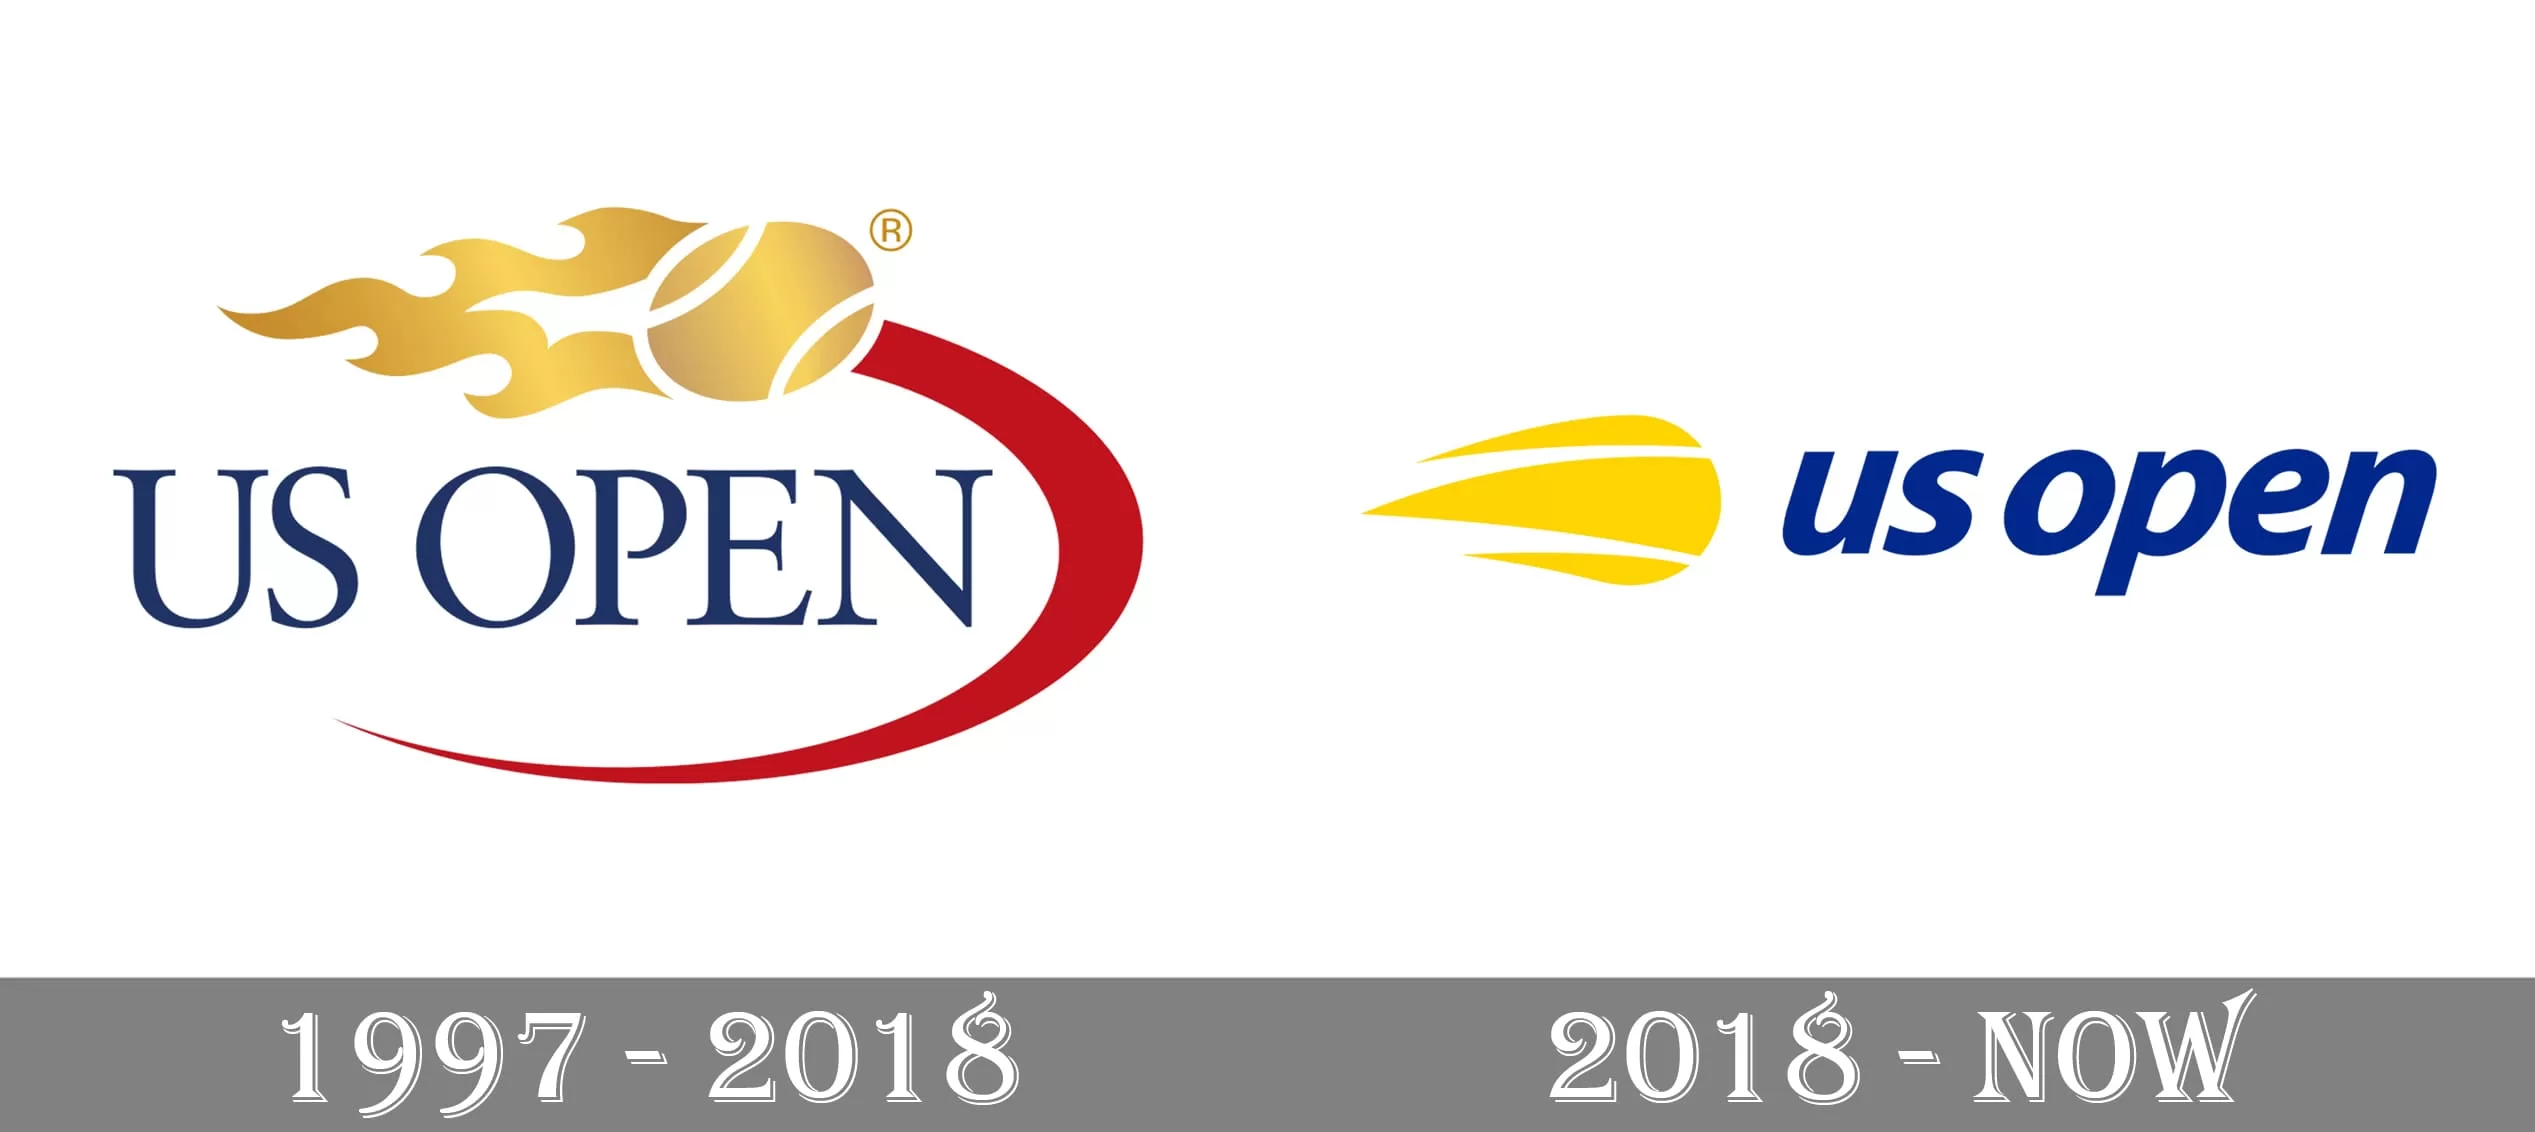 US Open (Tennis): Logo history and 10 fun facts